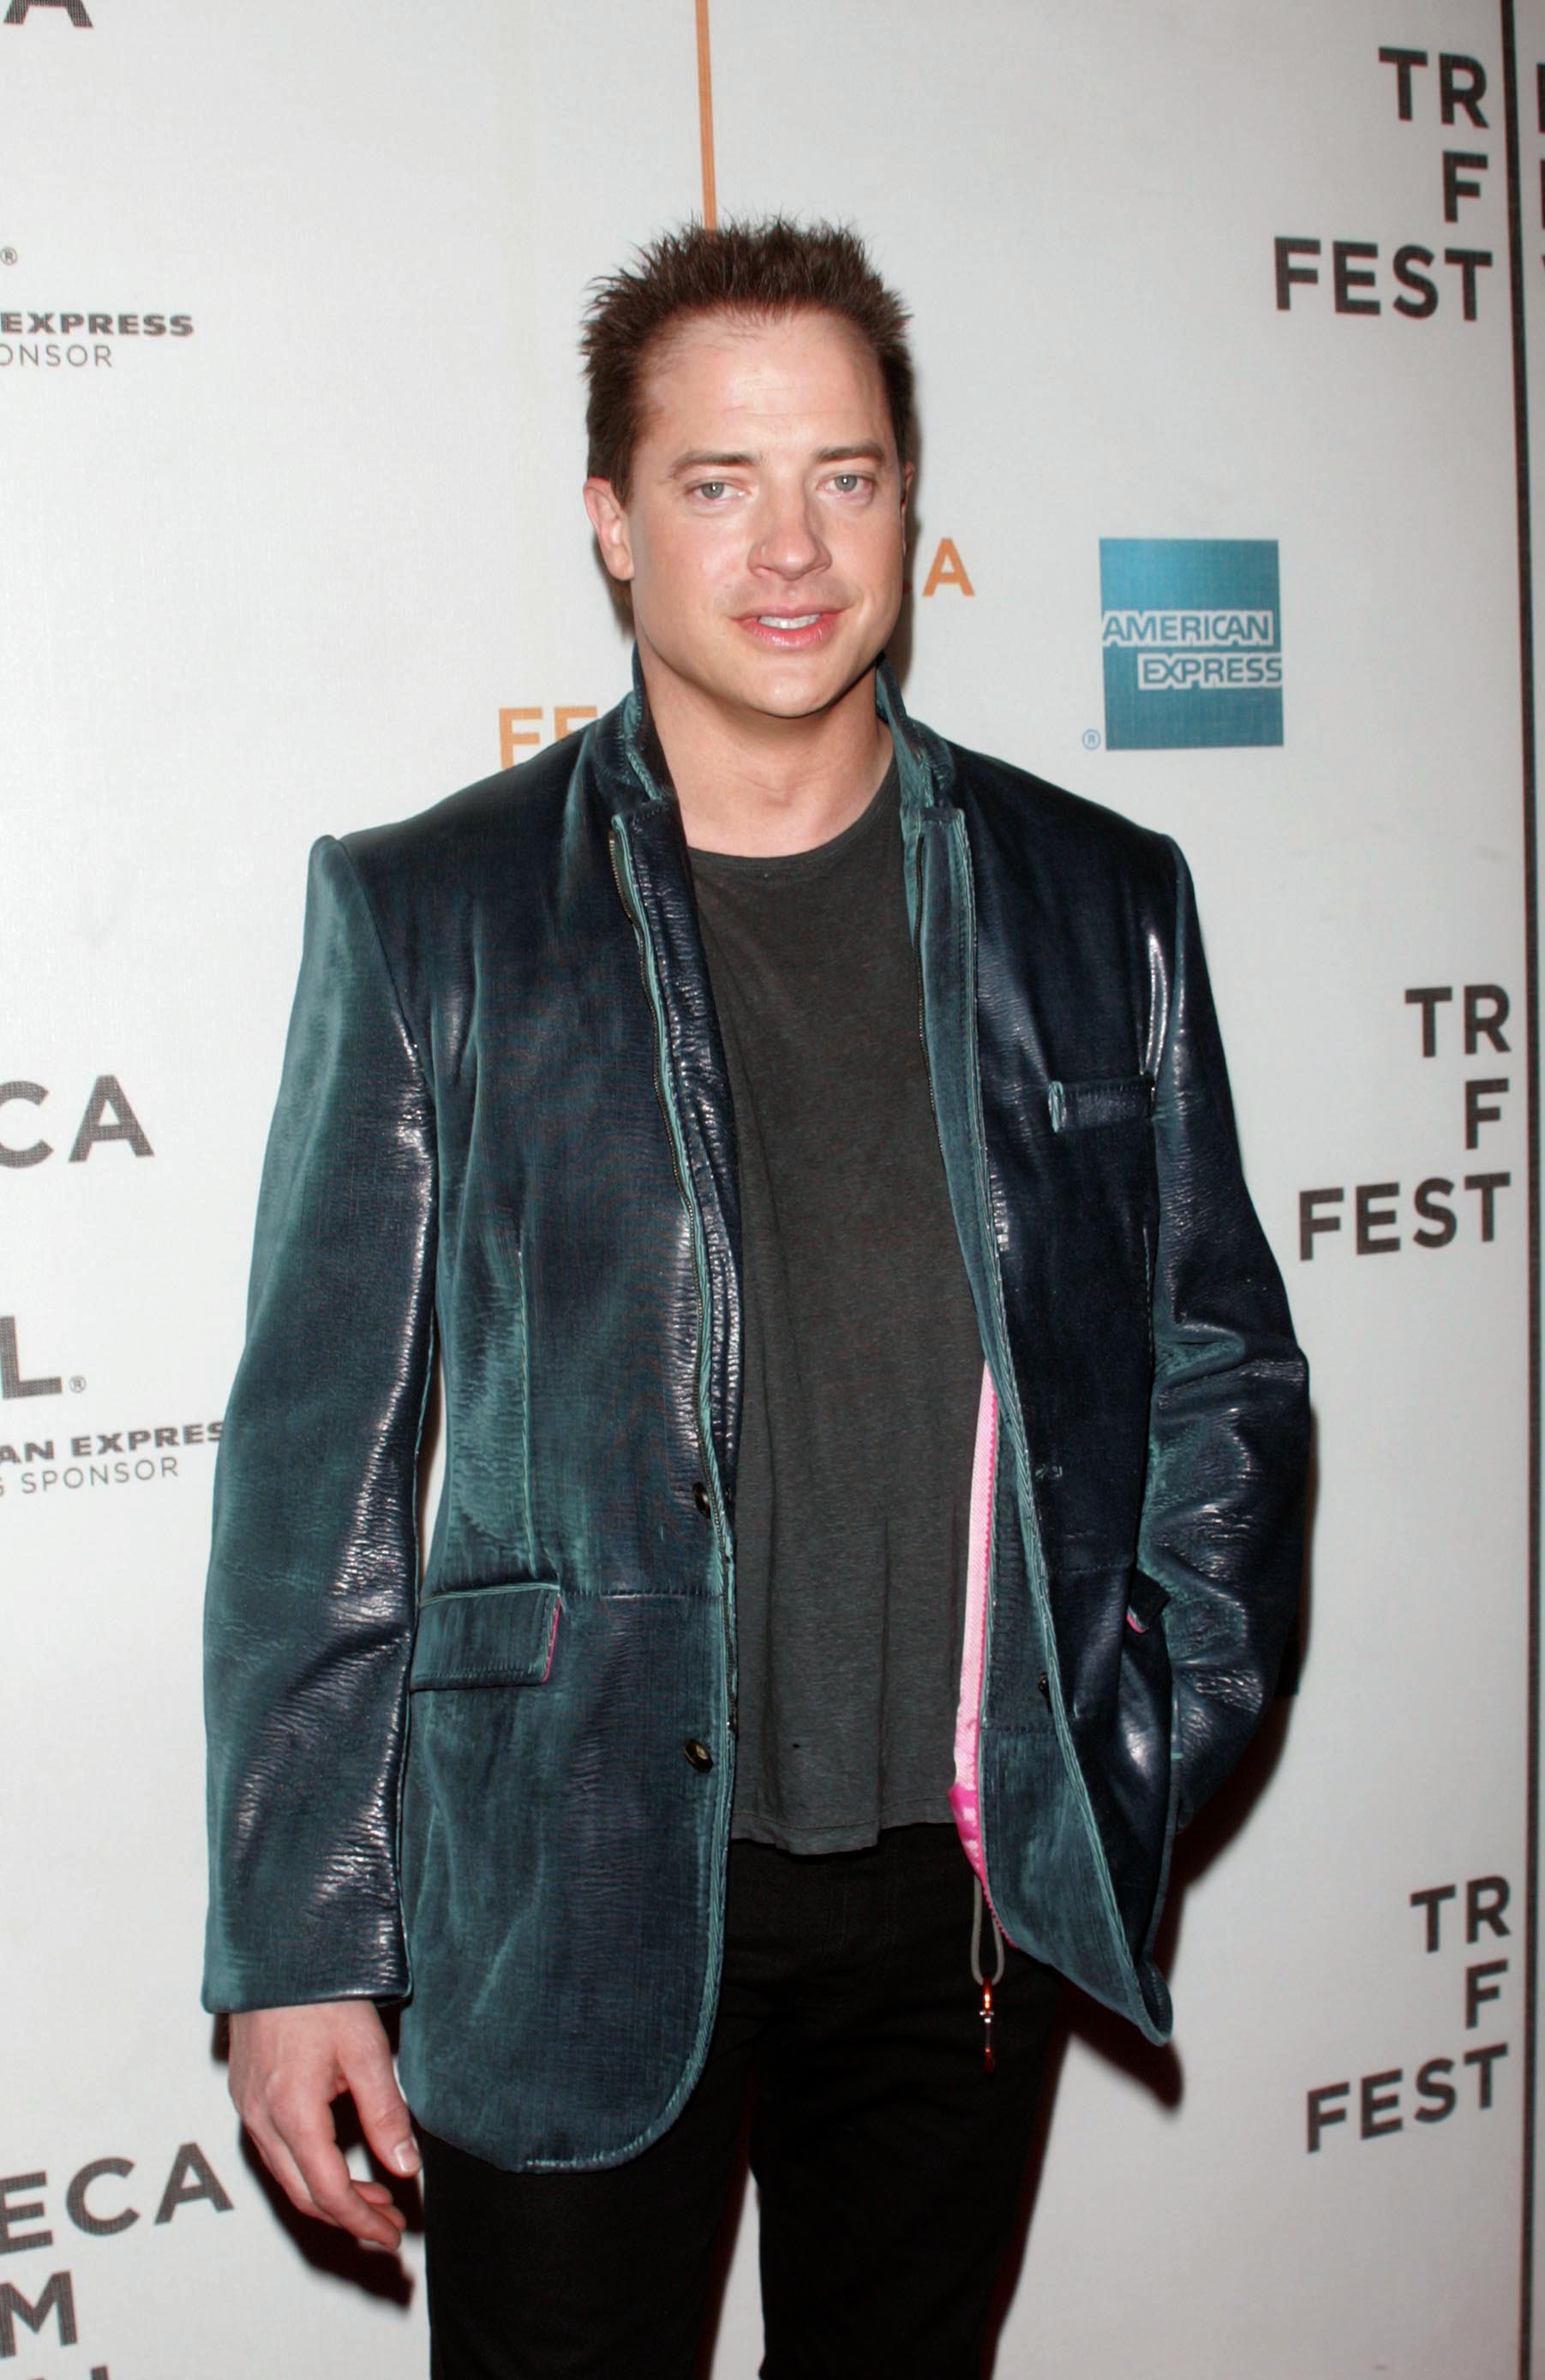 Brendan Fraser at the 6th Annual Tribeca Film Festival on April 29, 2007. | Source: Getty Images